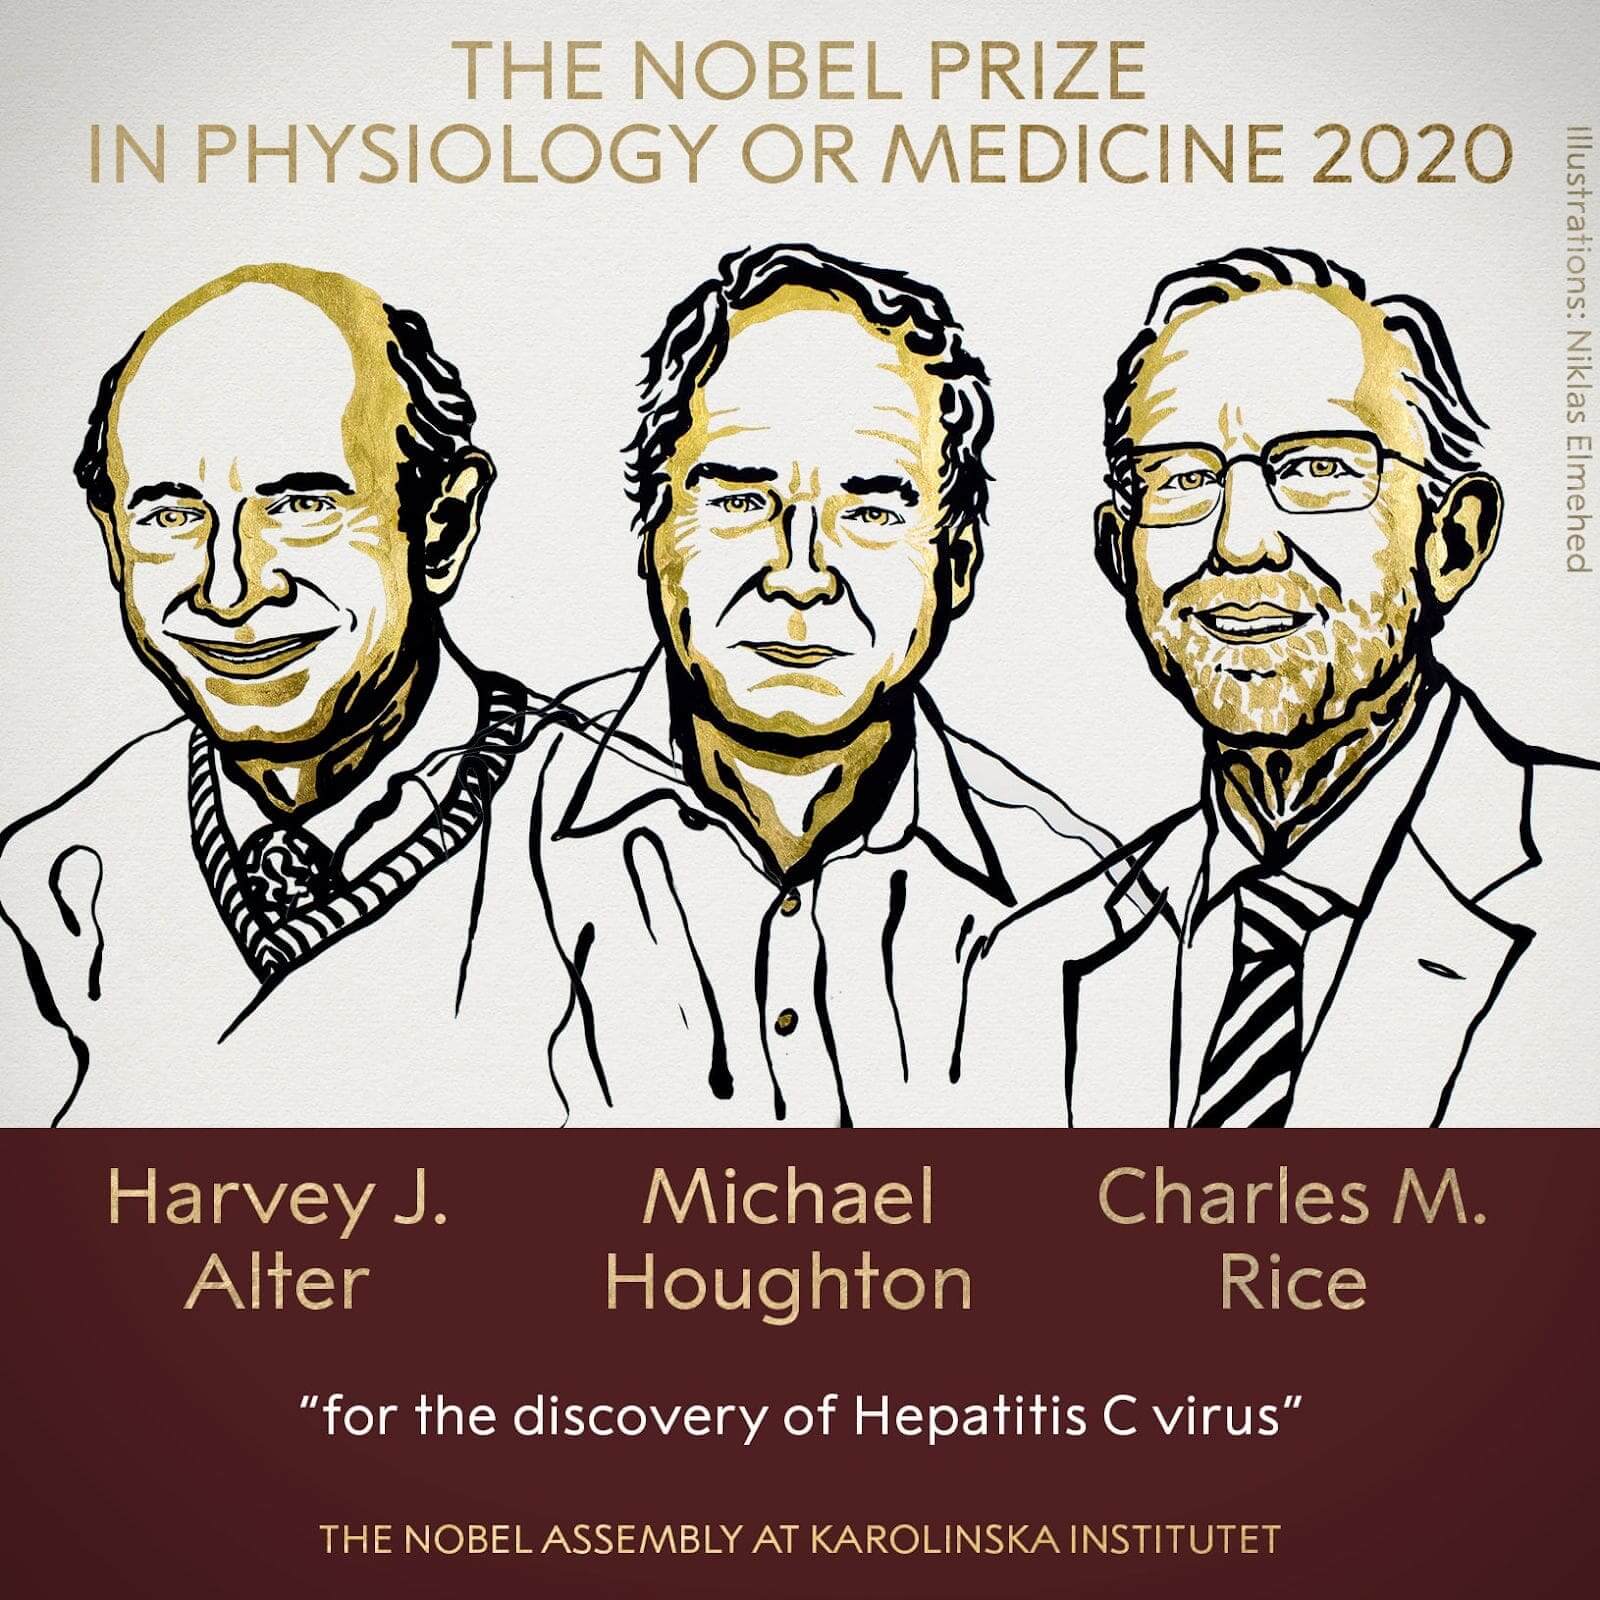 The Nobel Prize in Physiology or Medicine 2020